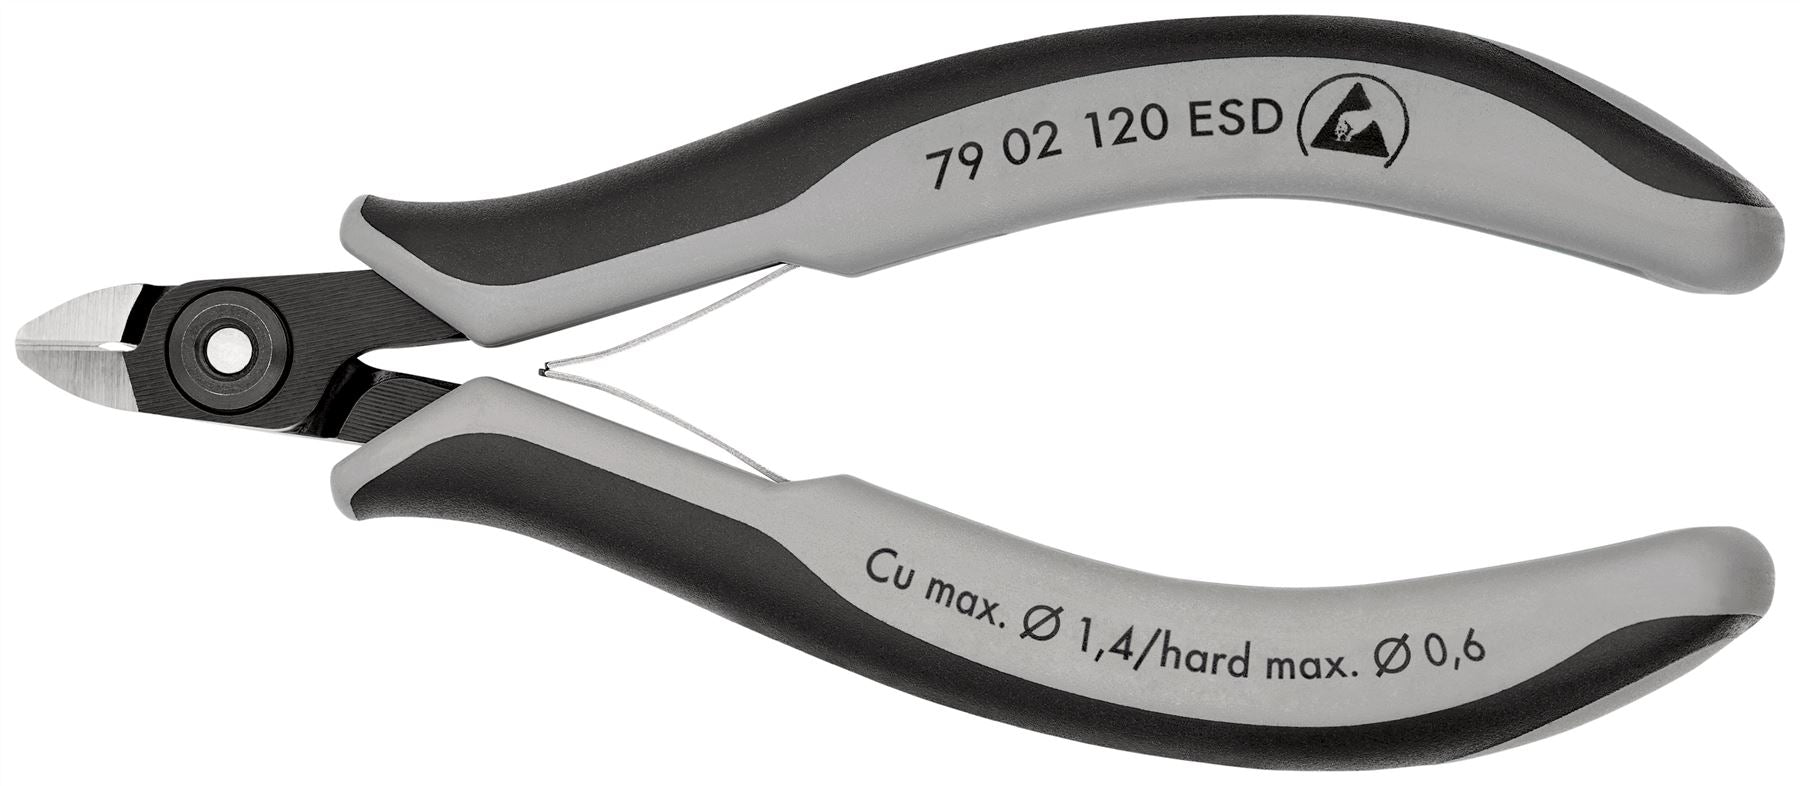 KNIPEX Precision Electronics Side Cutter Cutting Pliers ESD 120mm Multi Component Grips 79 02 120 ESD